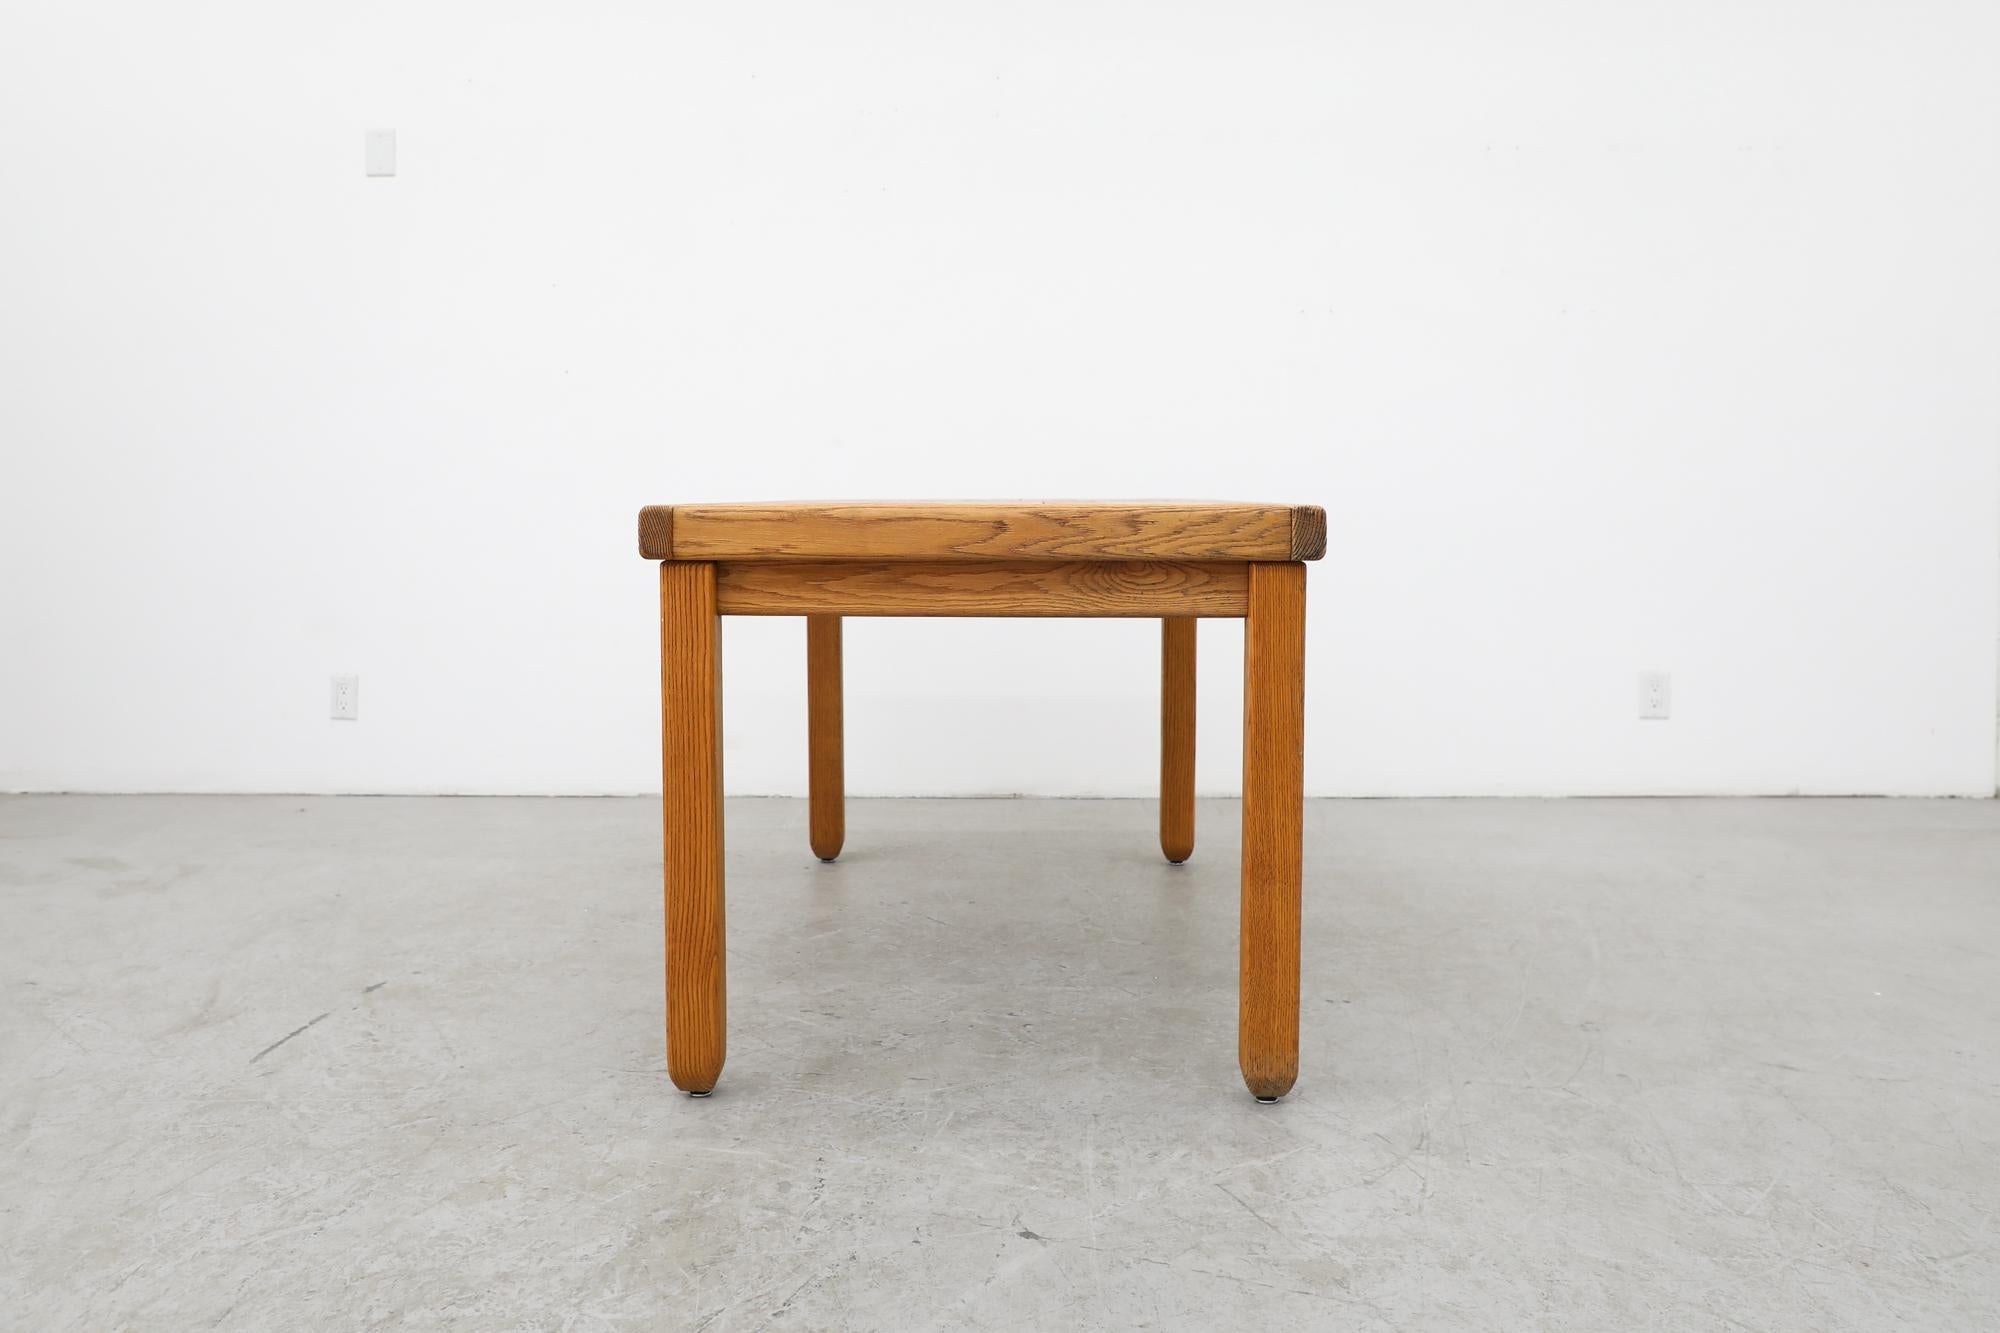 Dutch Brutalist Belgian Slatted Oak Dining Table w/ Rounded Legs Attributed to DePuydt For Sale